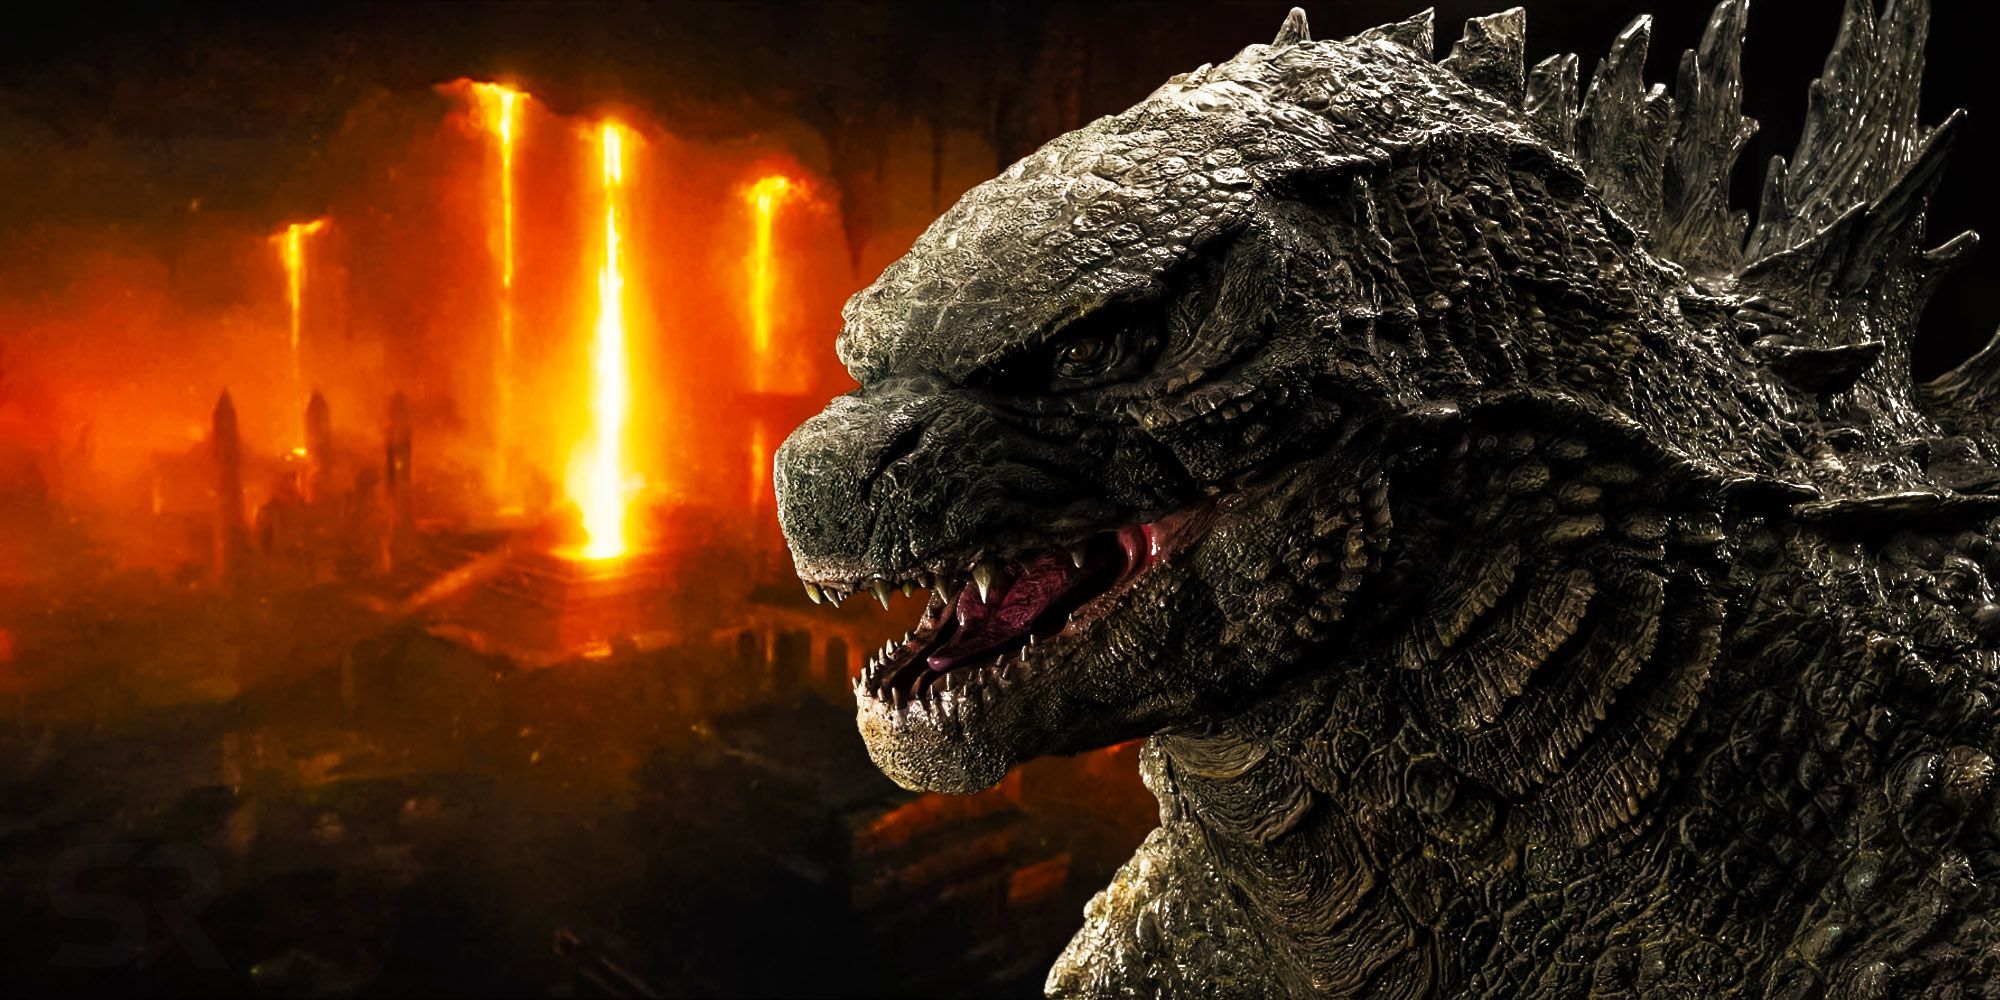 Godzilla Minus One: Release Date, Plot Details, Cast, Trailer And More